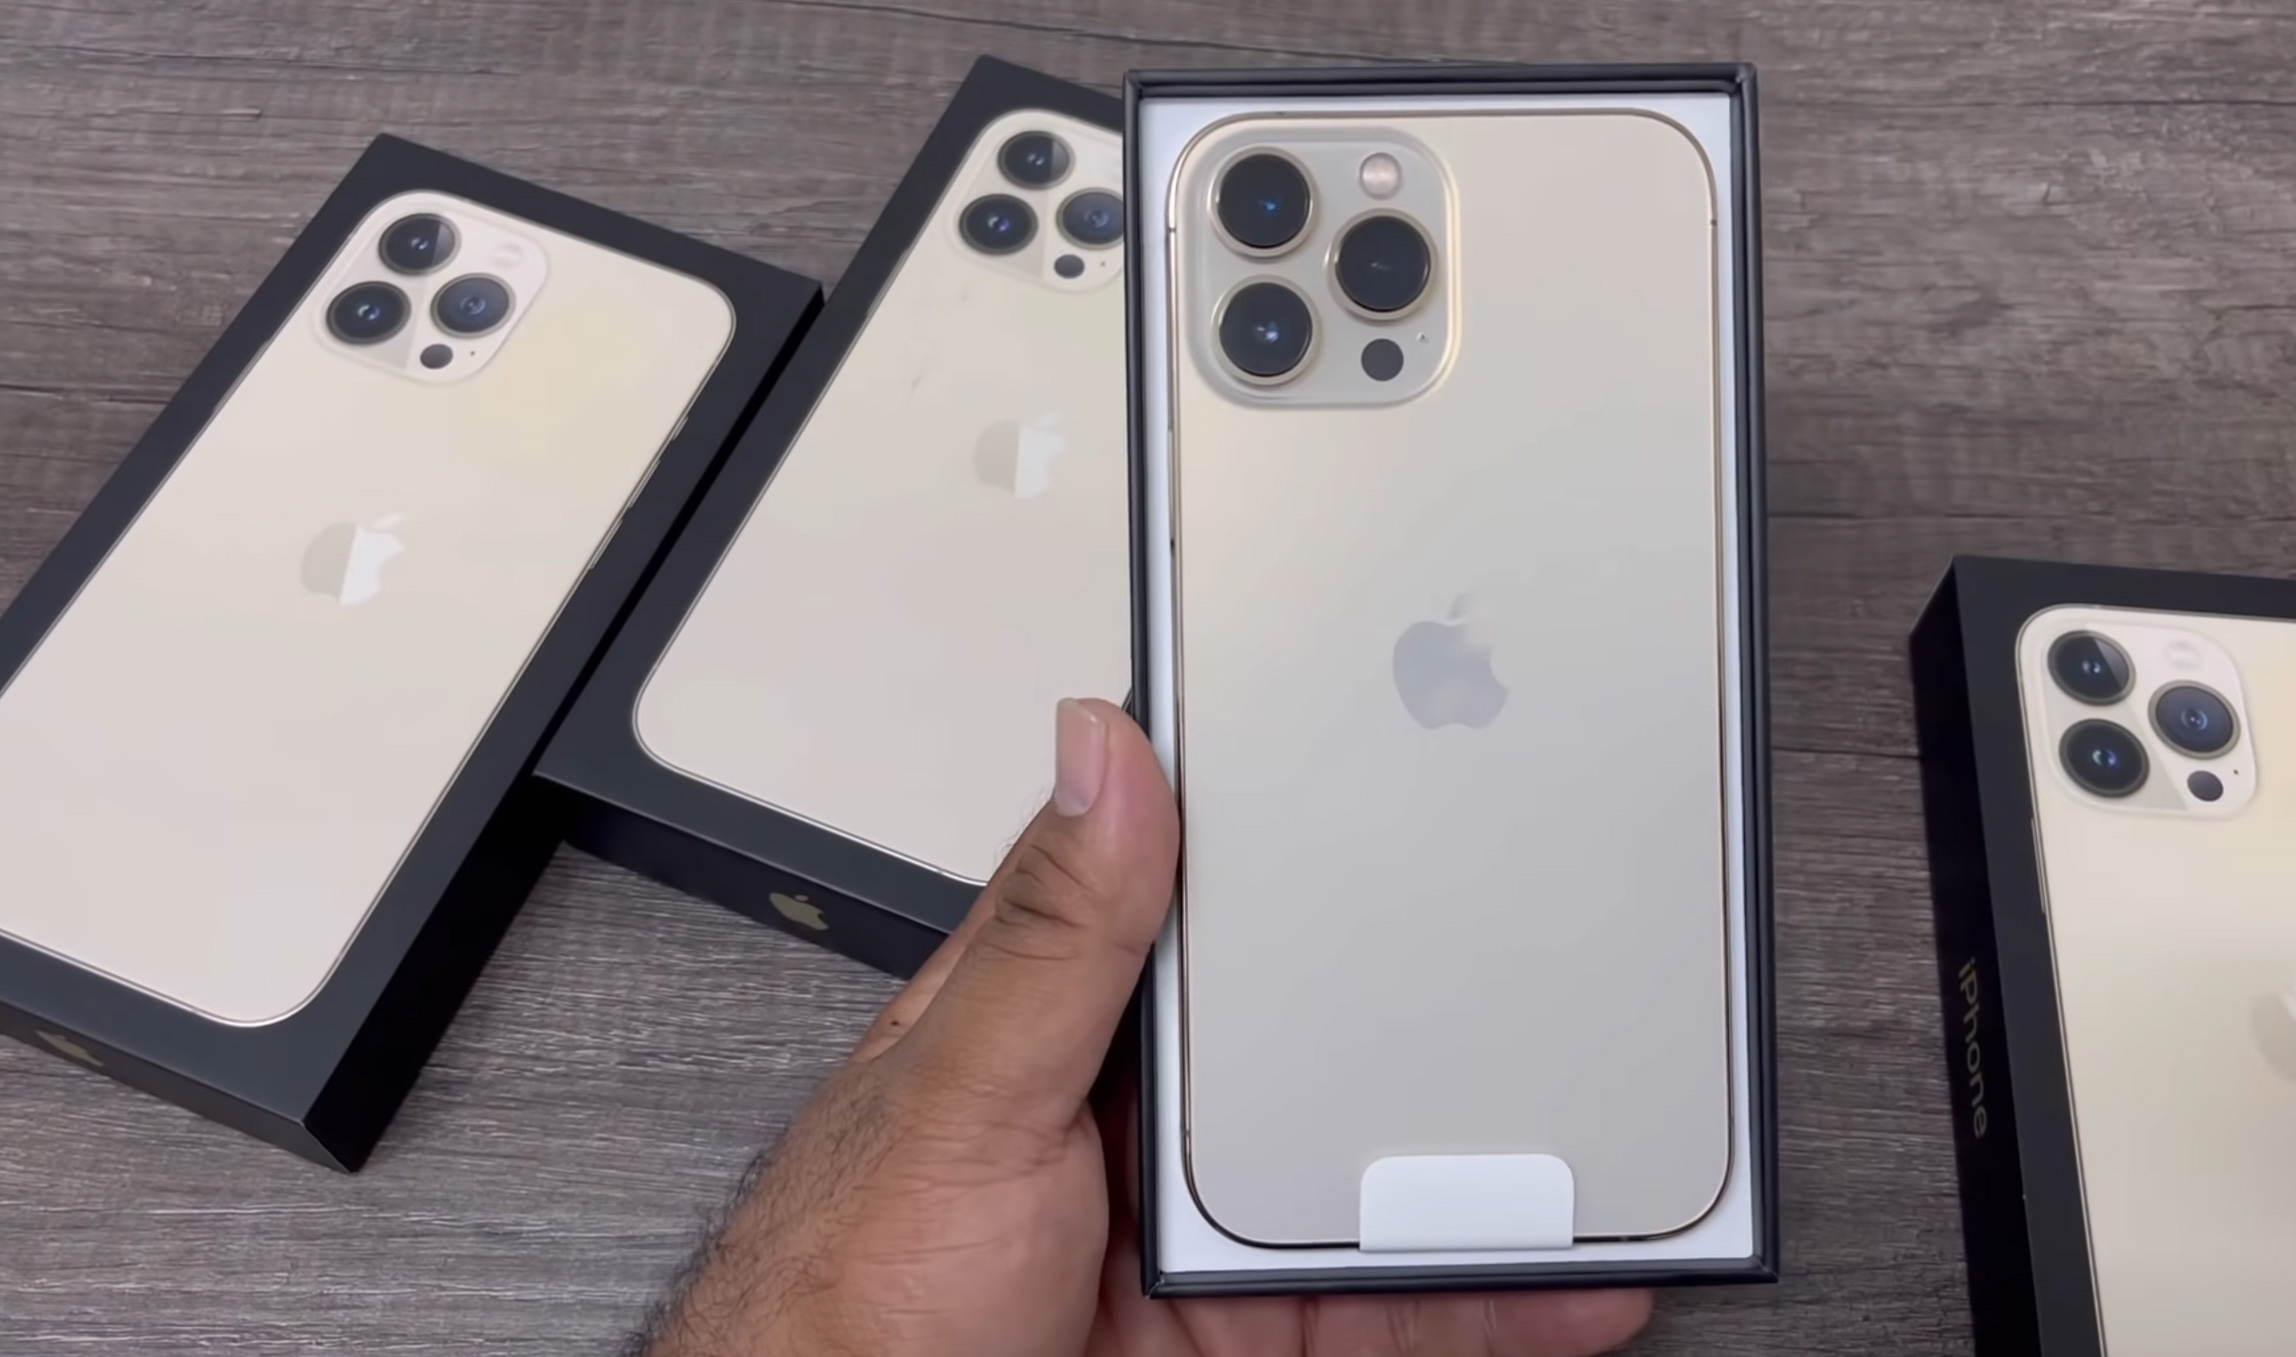 Unboxing iphone 13 pro max 128gb just for 2,100,000/=